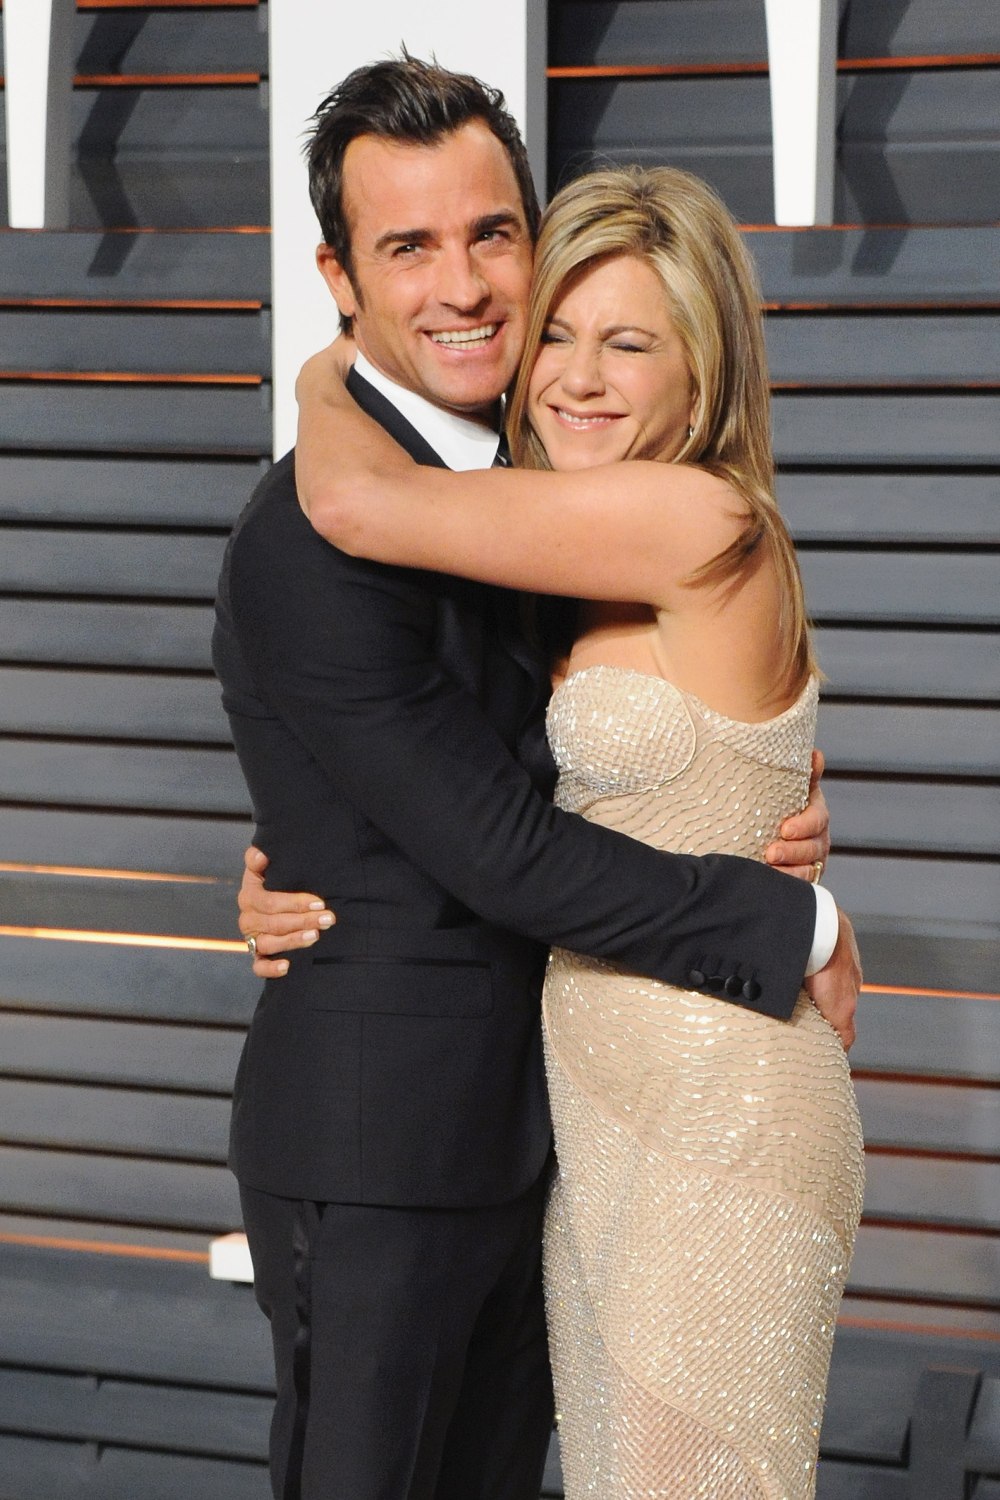 Theroux and Aniston